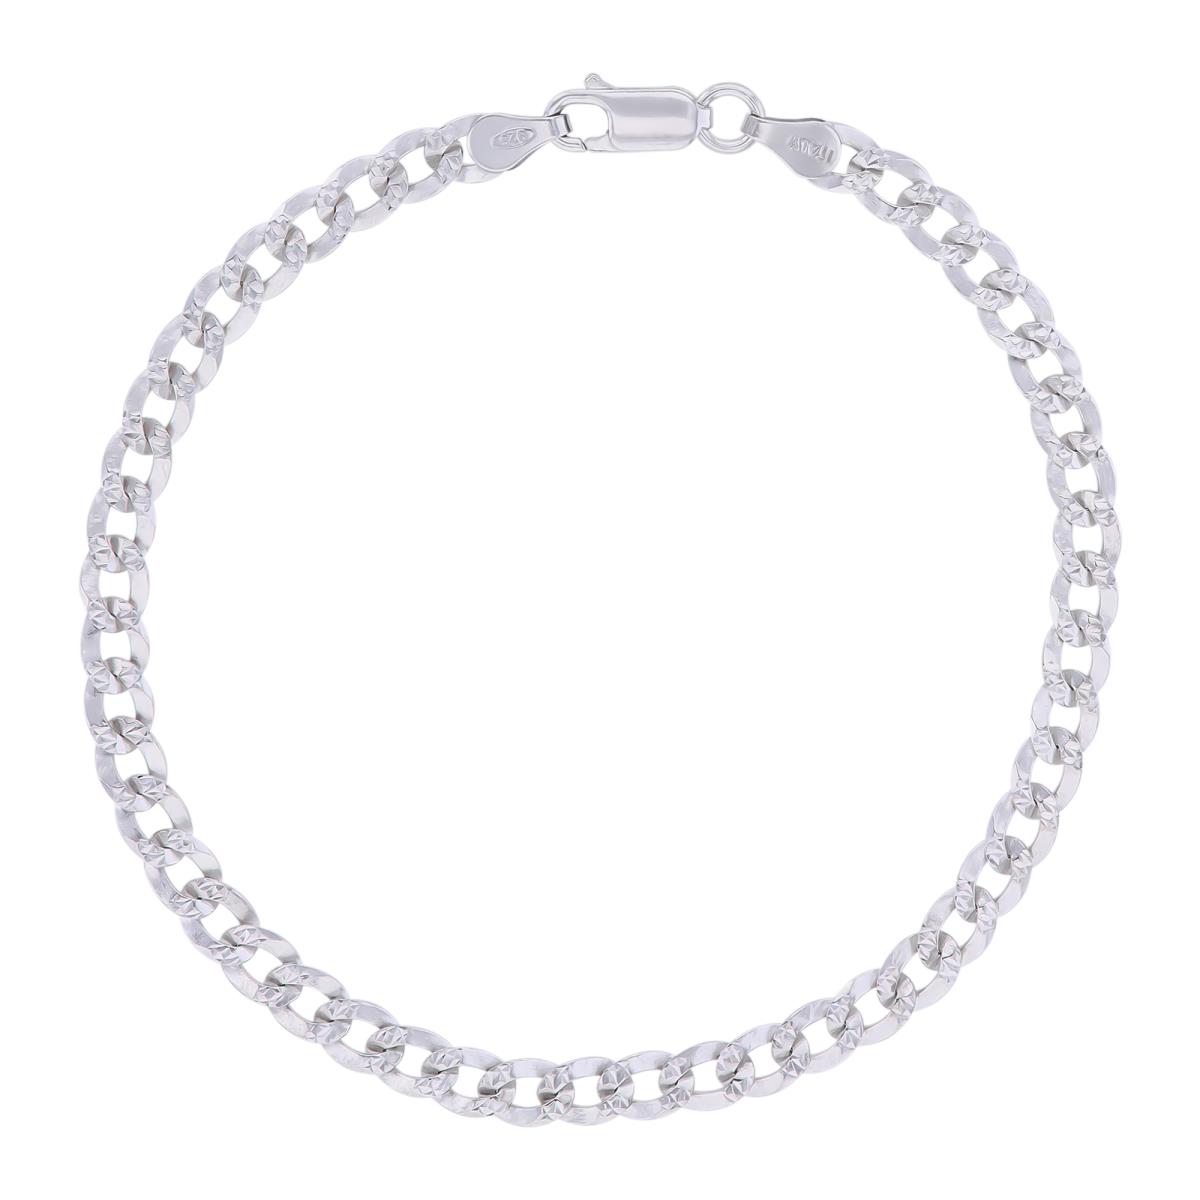 Sterling Silver Rhodium DC 4.6mm 120 Curb Pave 8.25"Chain Bracelet